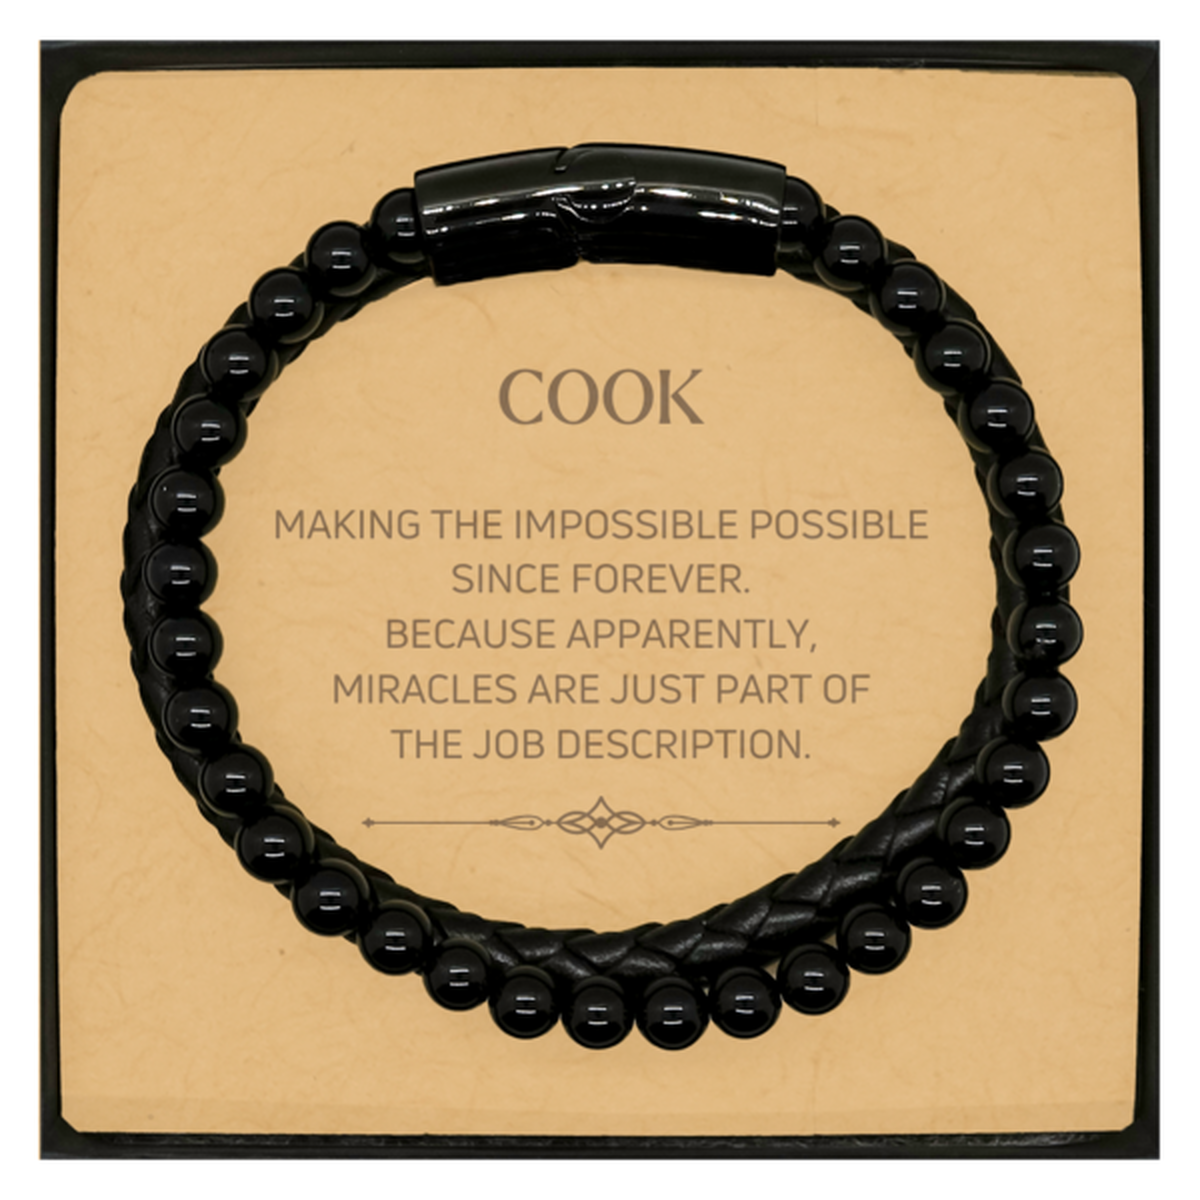 Funny Cook Gifts, Miracles are just part of the job description, Inspirational Birthday Christmas Stone Leather Bracelets For Cook, Men, Women, Coworkers, Friends, Boss